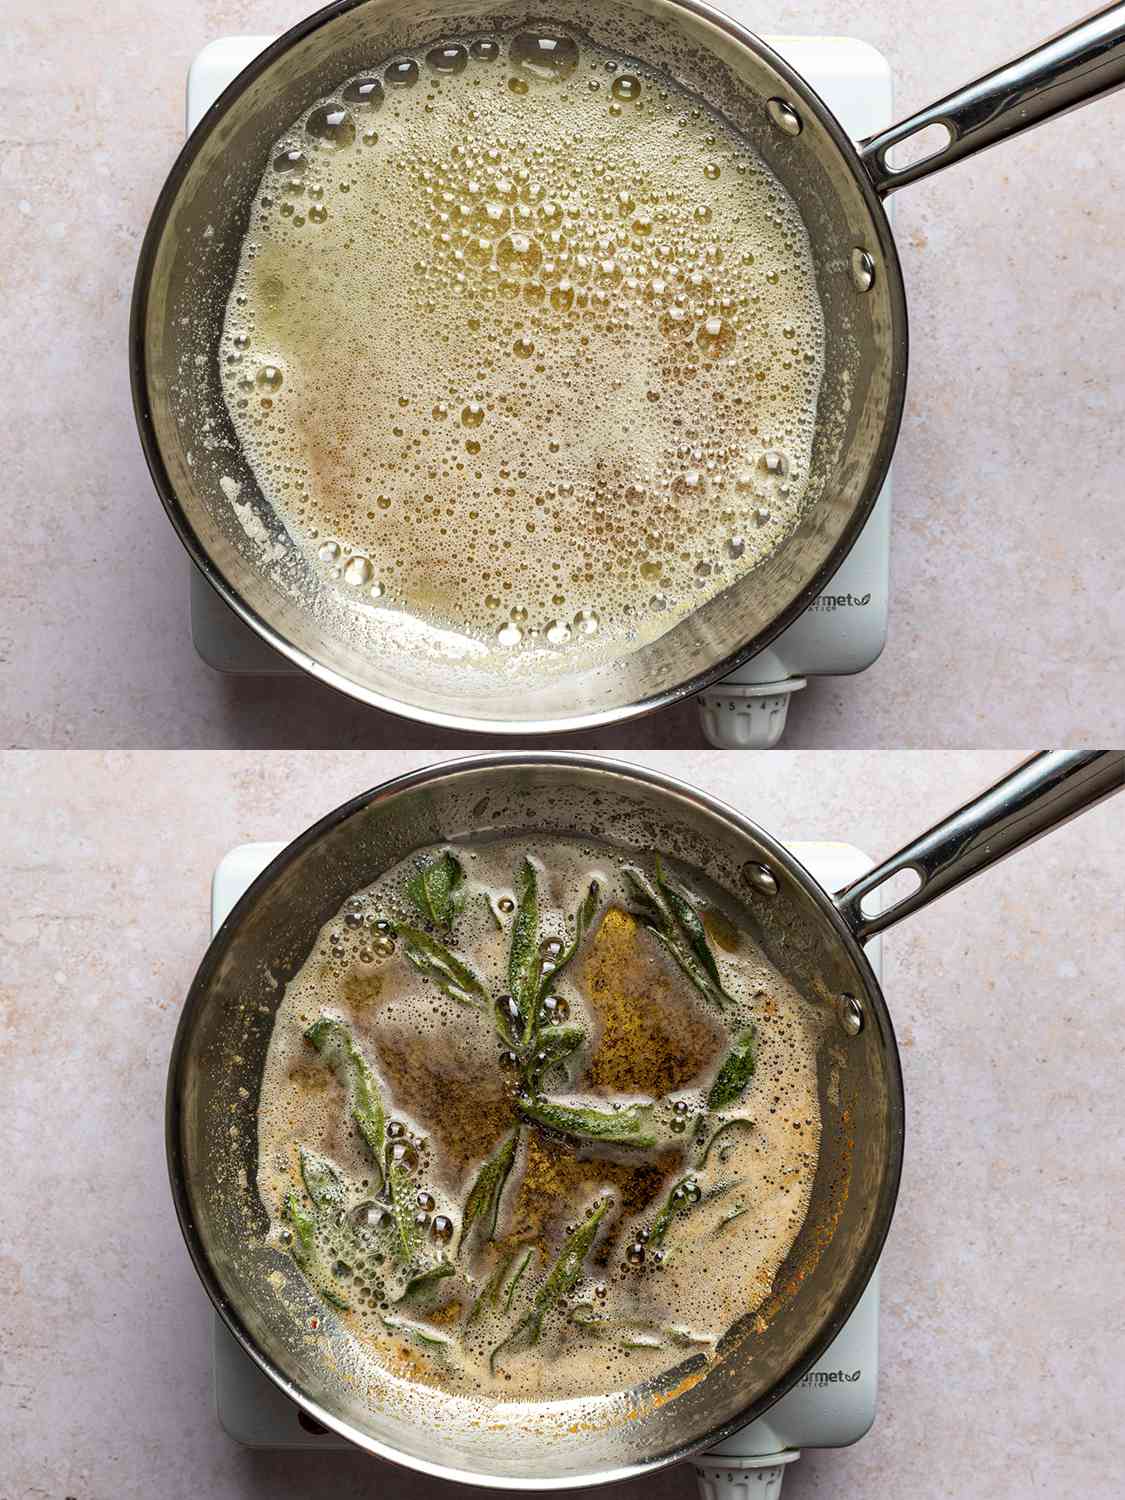 A two-image collage. The top image shows foamy butter beginning to brown inside a small skillet over medium-high heat. The bottom image shows sage leaves cooked until frizzled inside of the skillet.